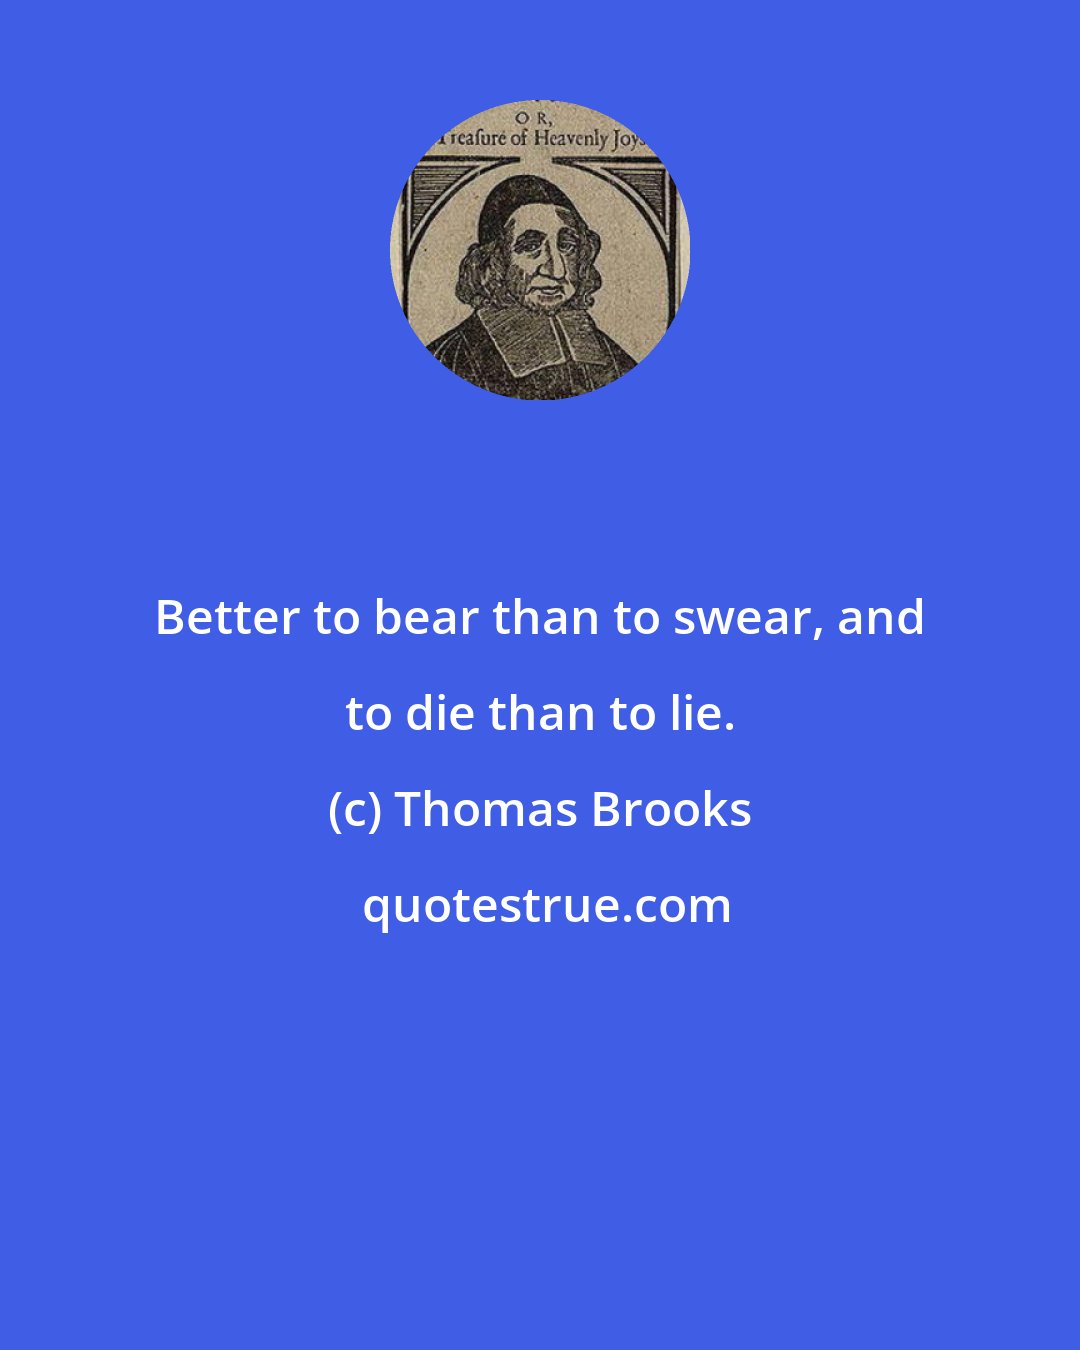 Thomas Brooks: Better to bear than to swear, and to die than to lie.